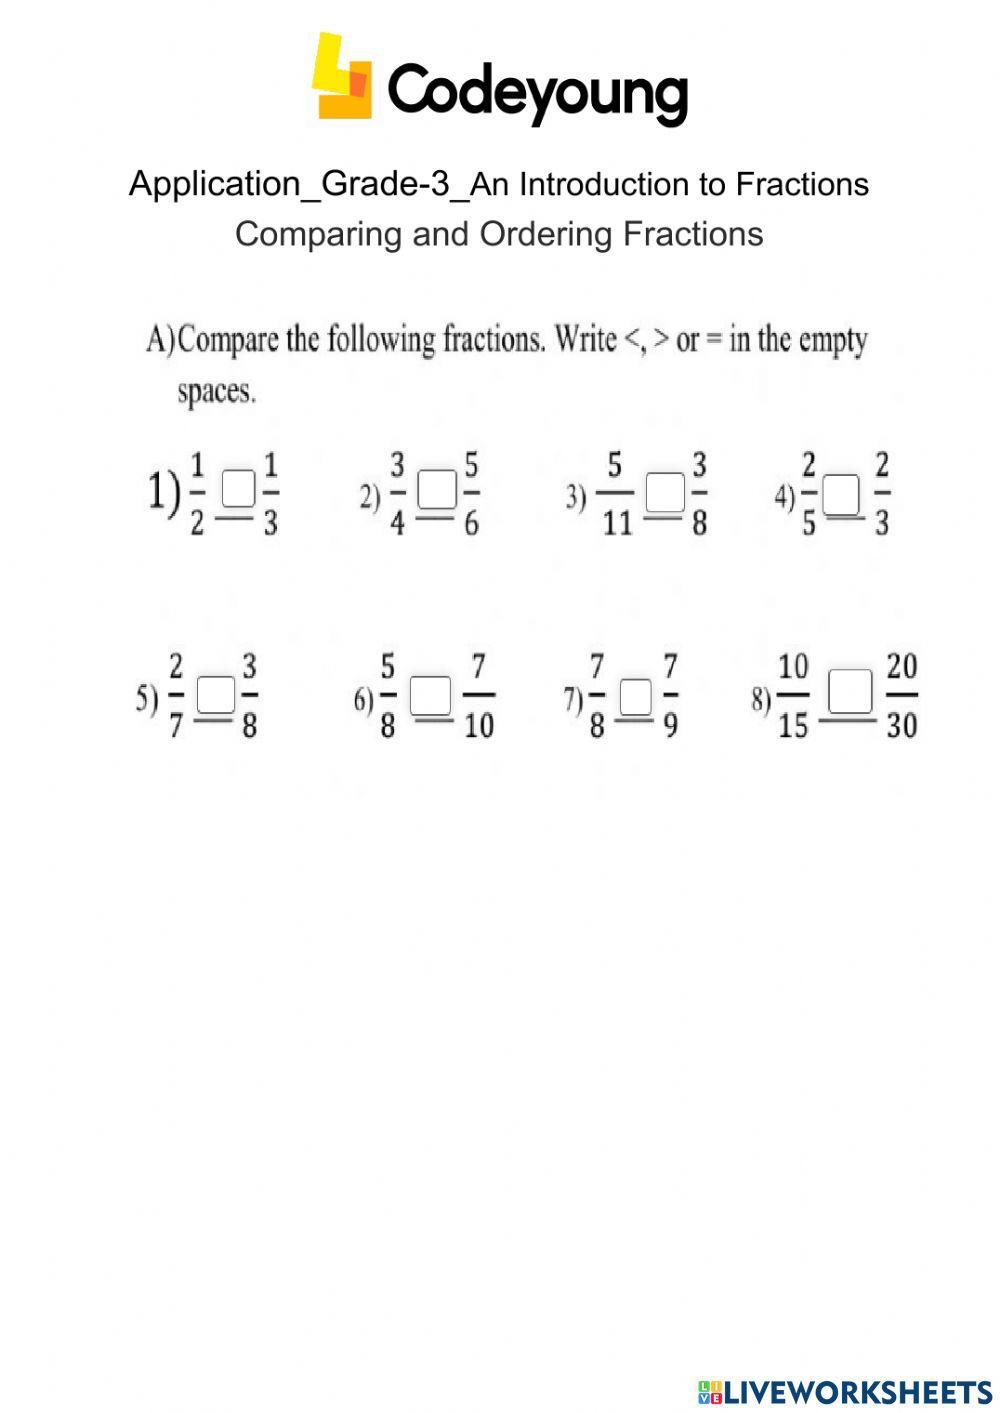 Comapring and ordering fractions